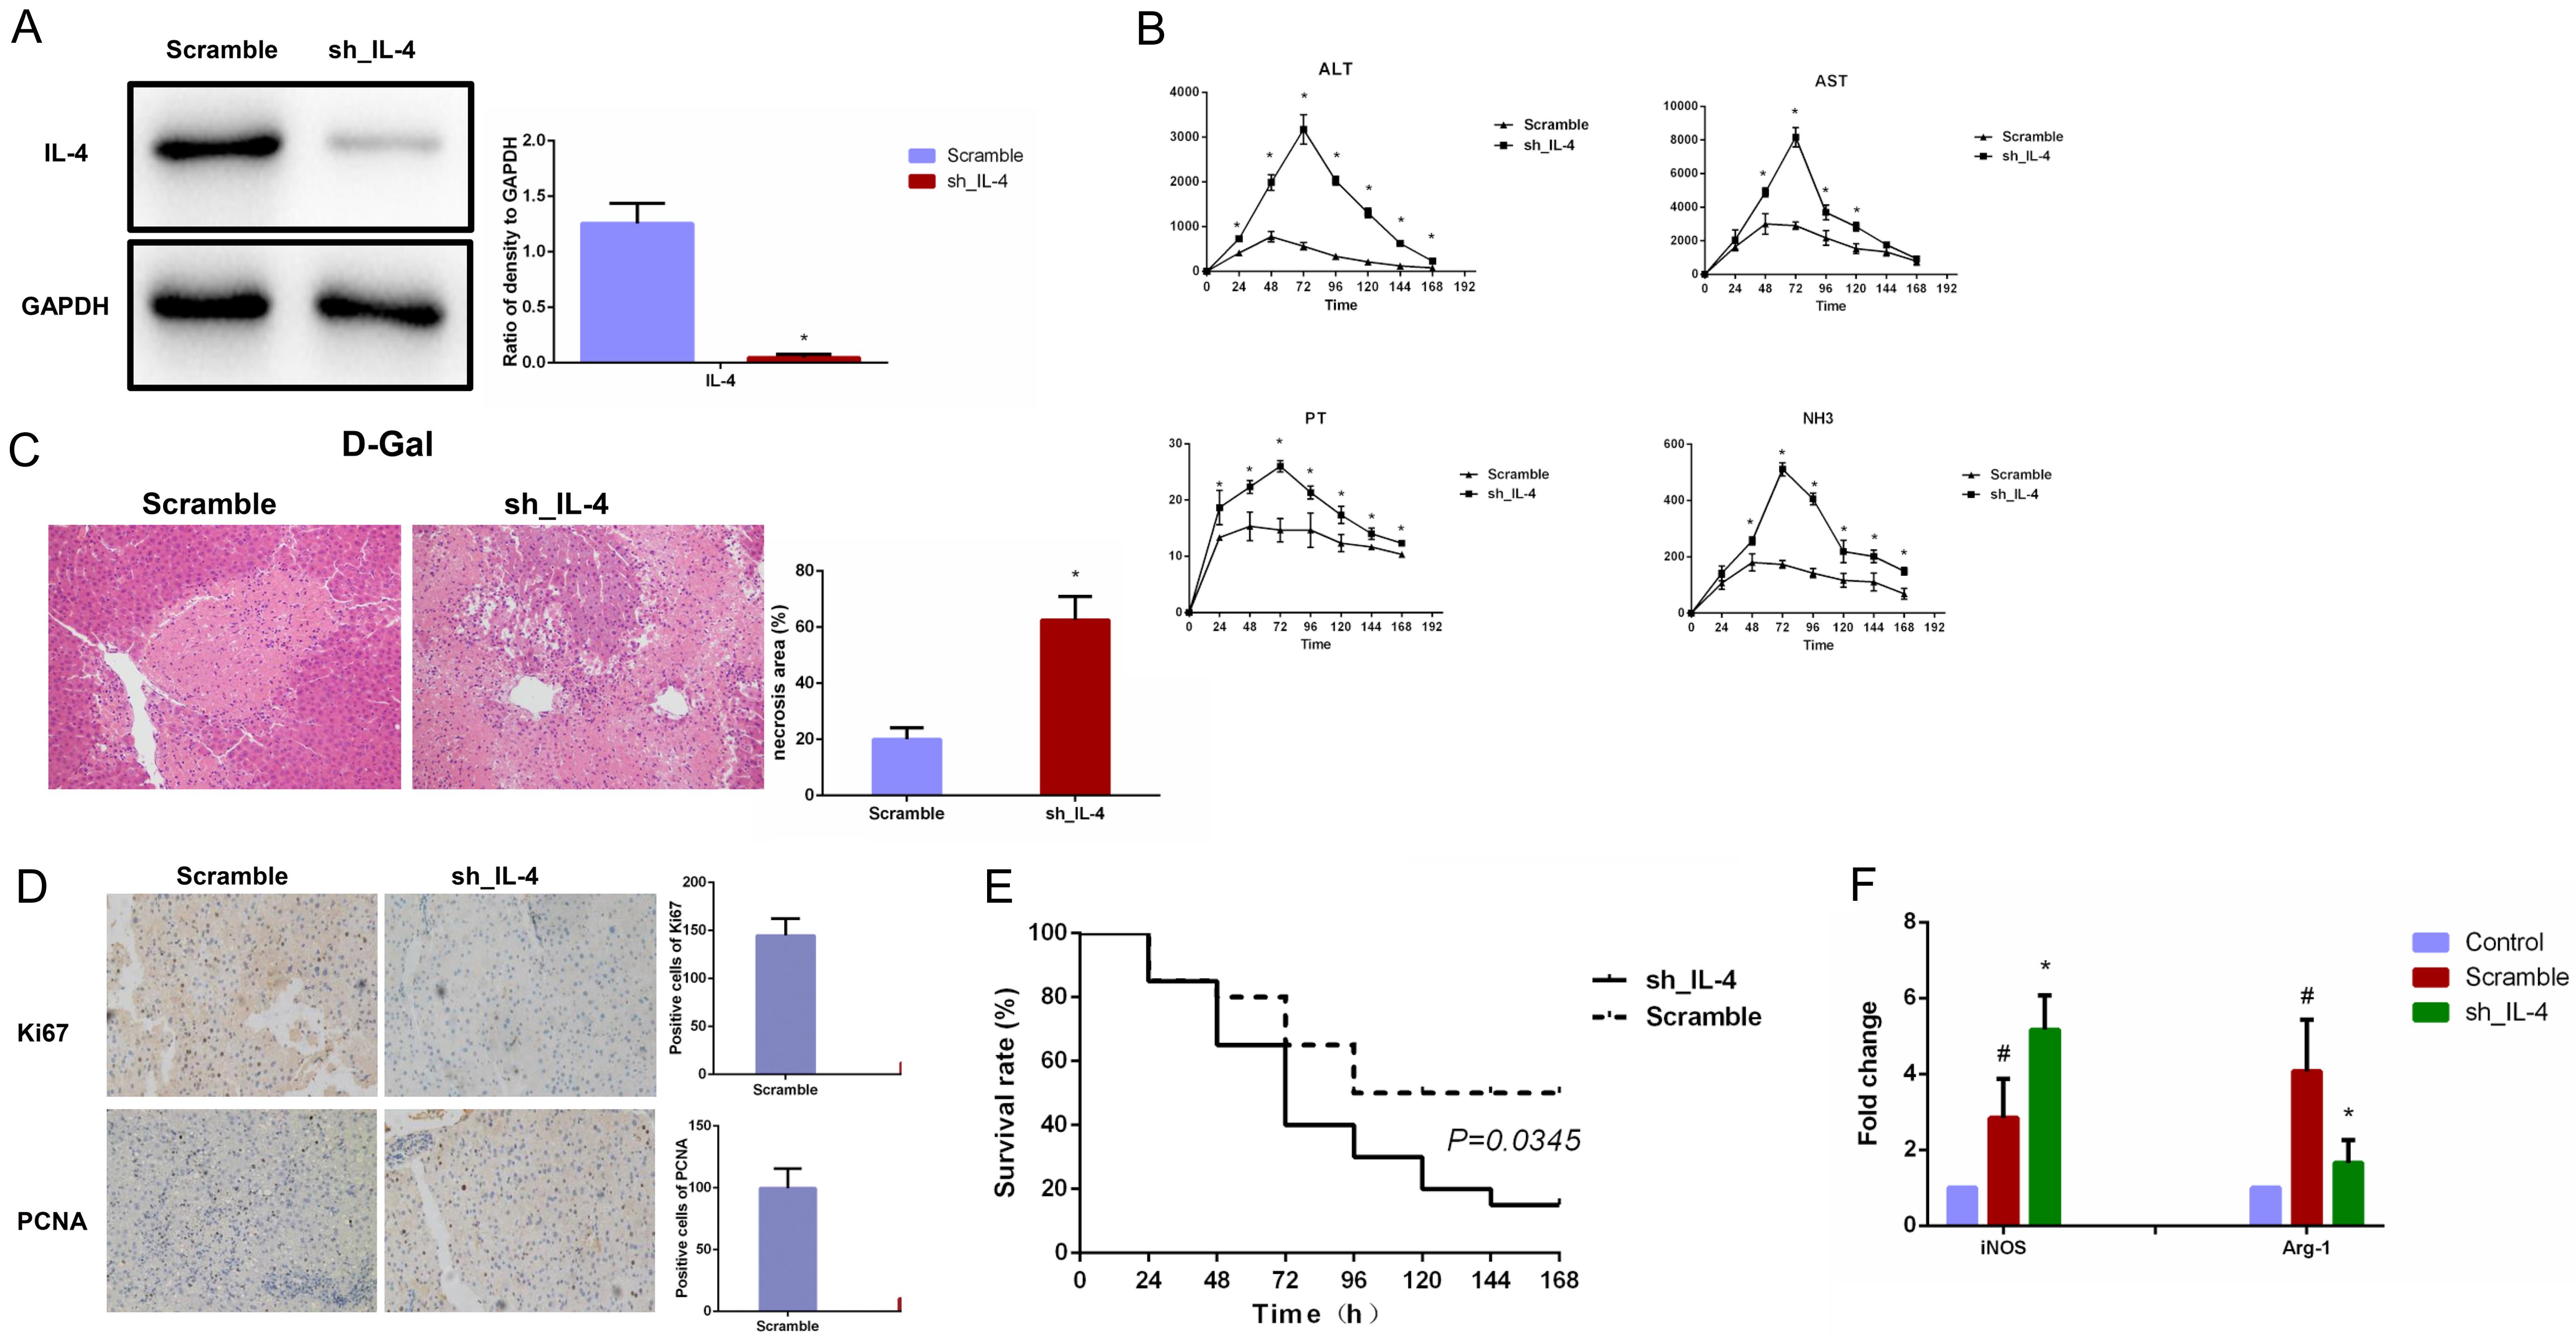 Silencing of IL-4 abrogated mesenchymal stem cell (MSC) transplantation promoted a switch to the macrophage M2 phenotype.